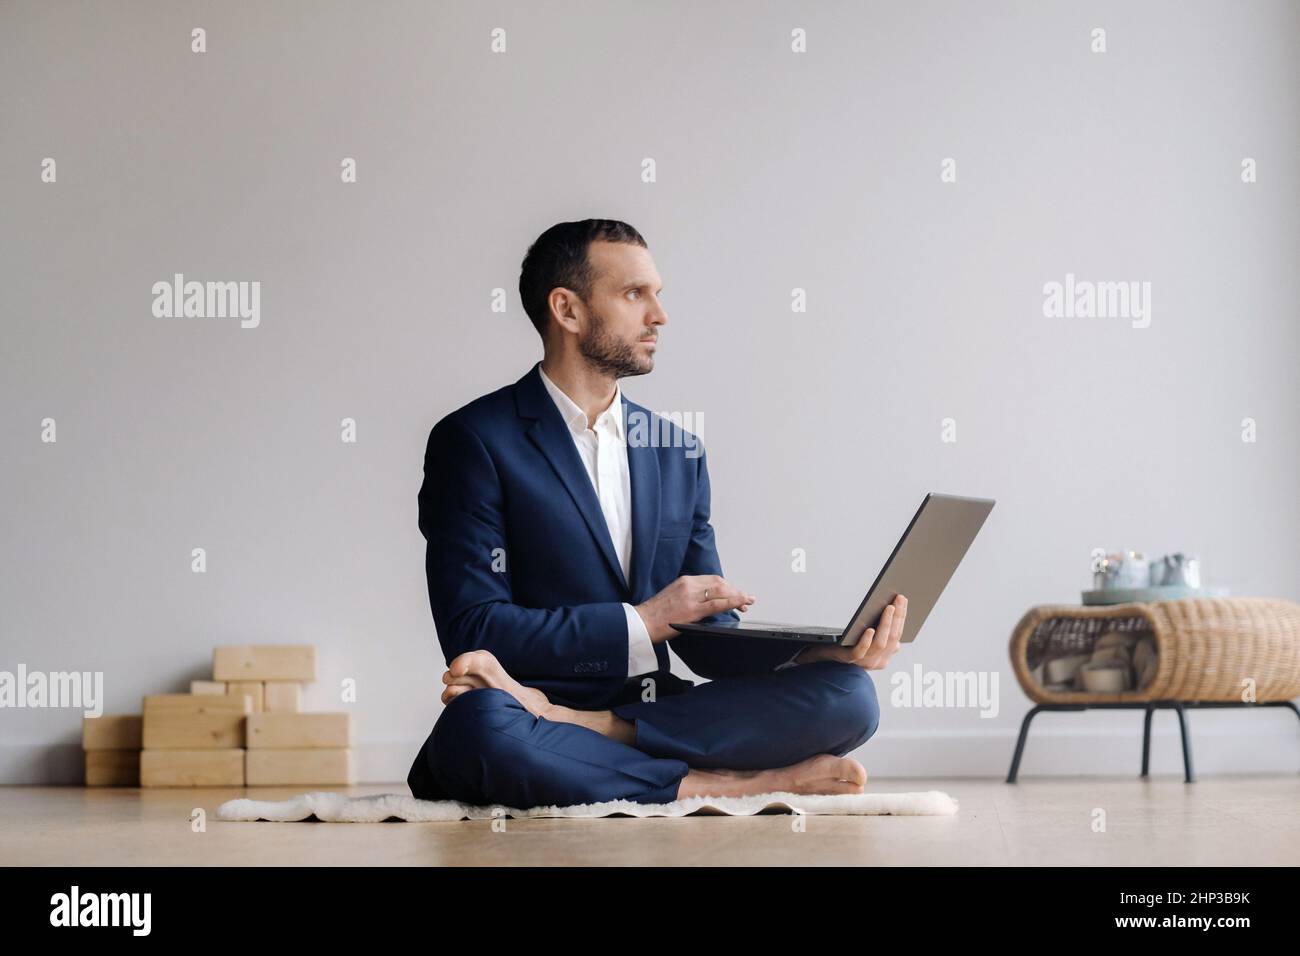 A man in a formal suit works sitting in a fitness room on a laptop Stock Photo